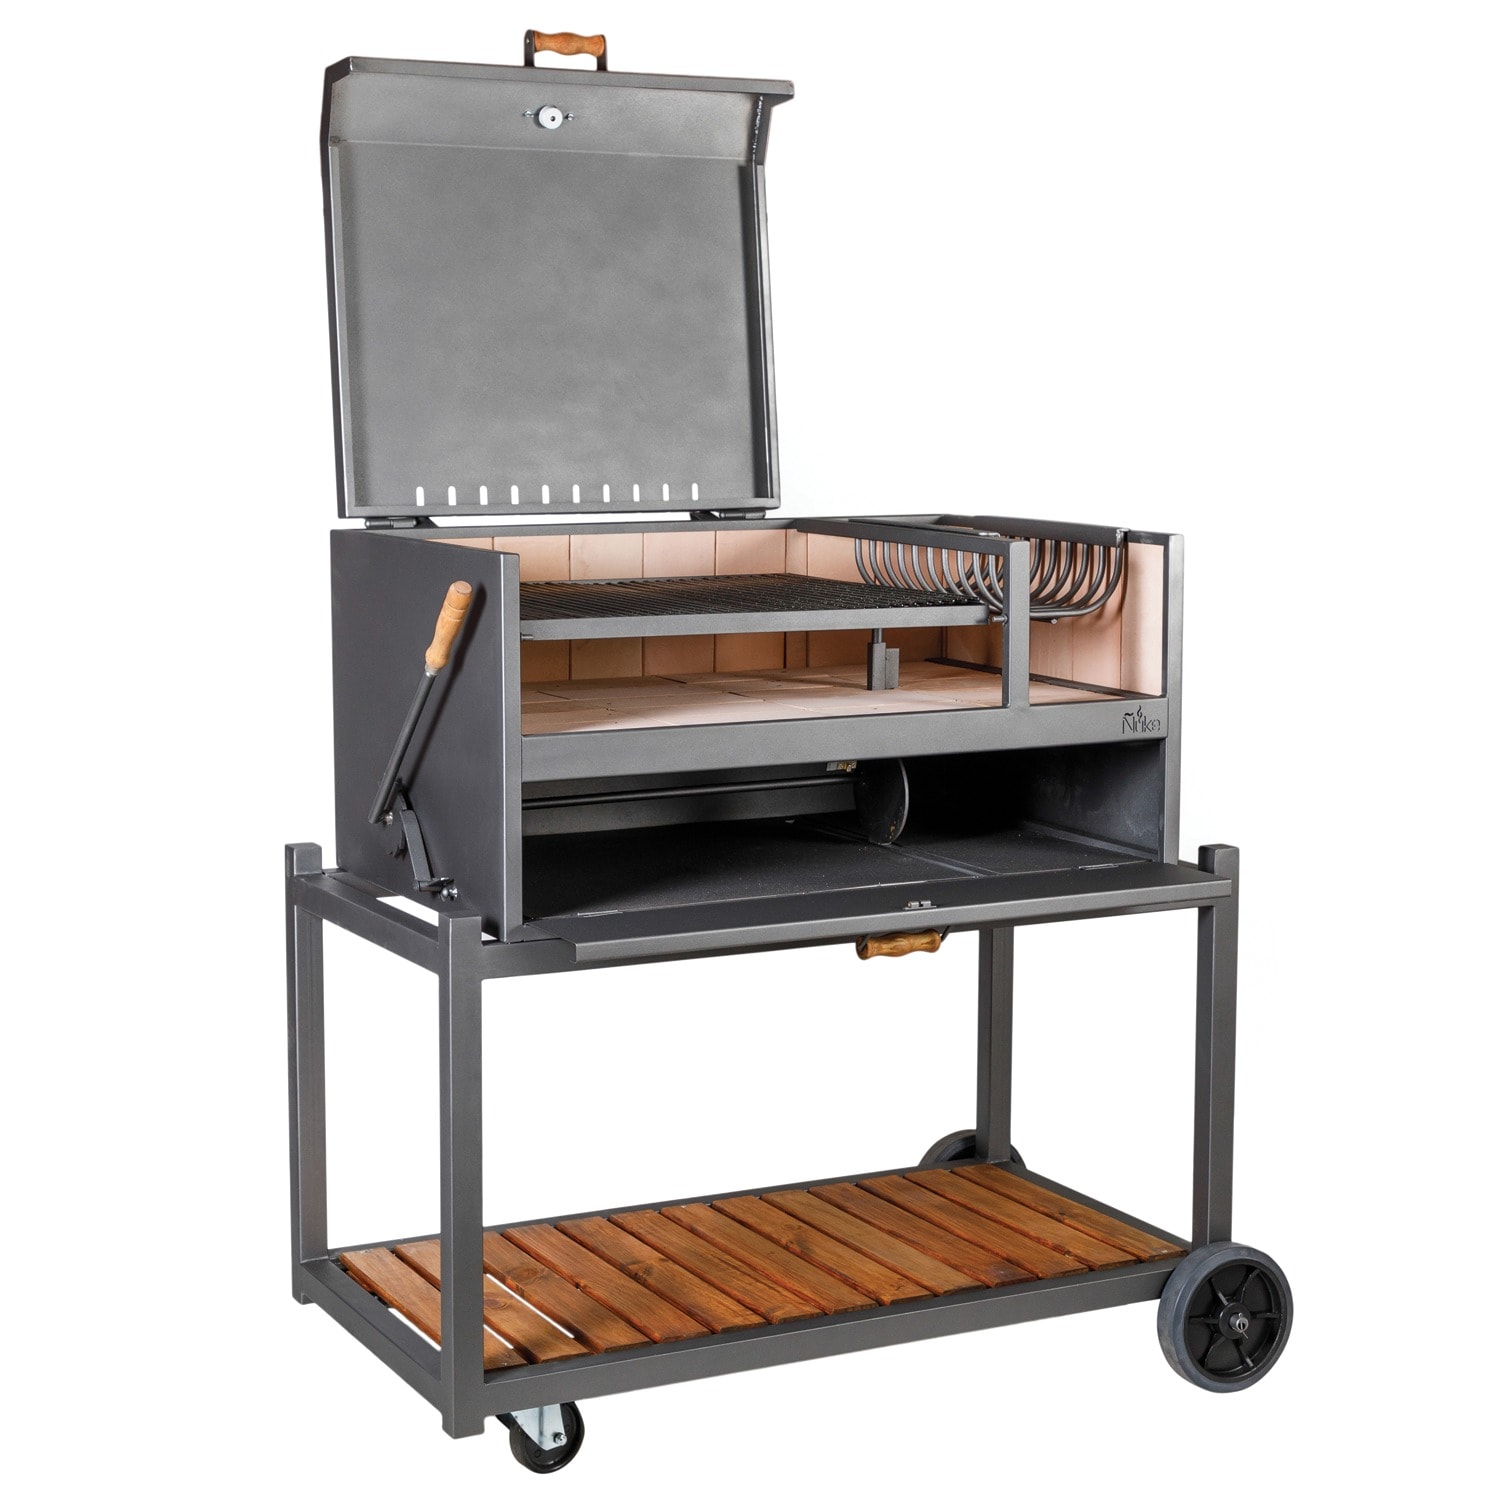 Nuke Gaucho Medium Black Charcoal Grill, 547 Sq. Inches Cooking Area, Ceramic Lid, Refractory Brick-lined Firebox